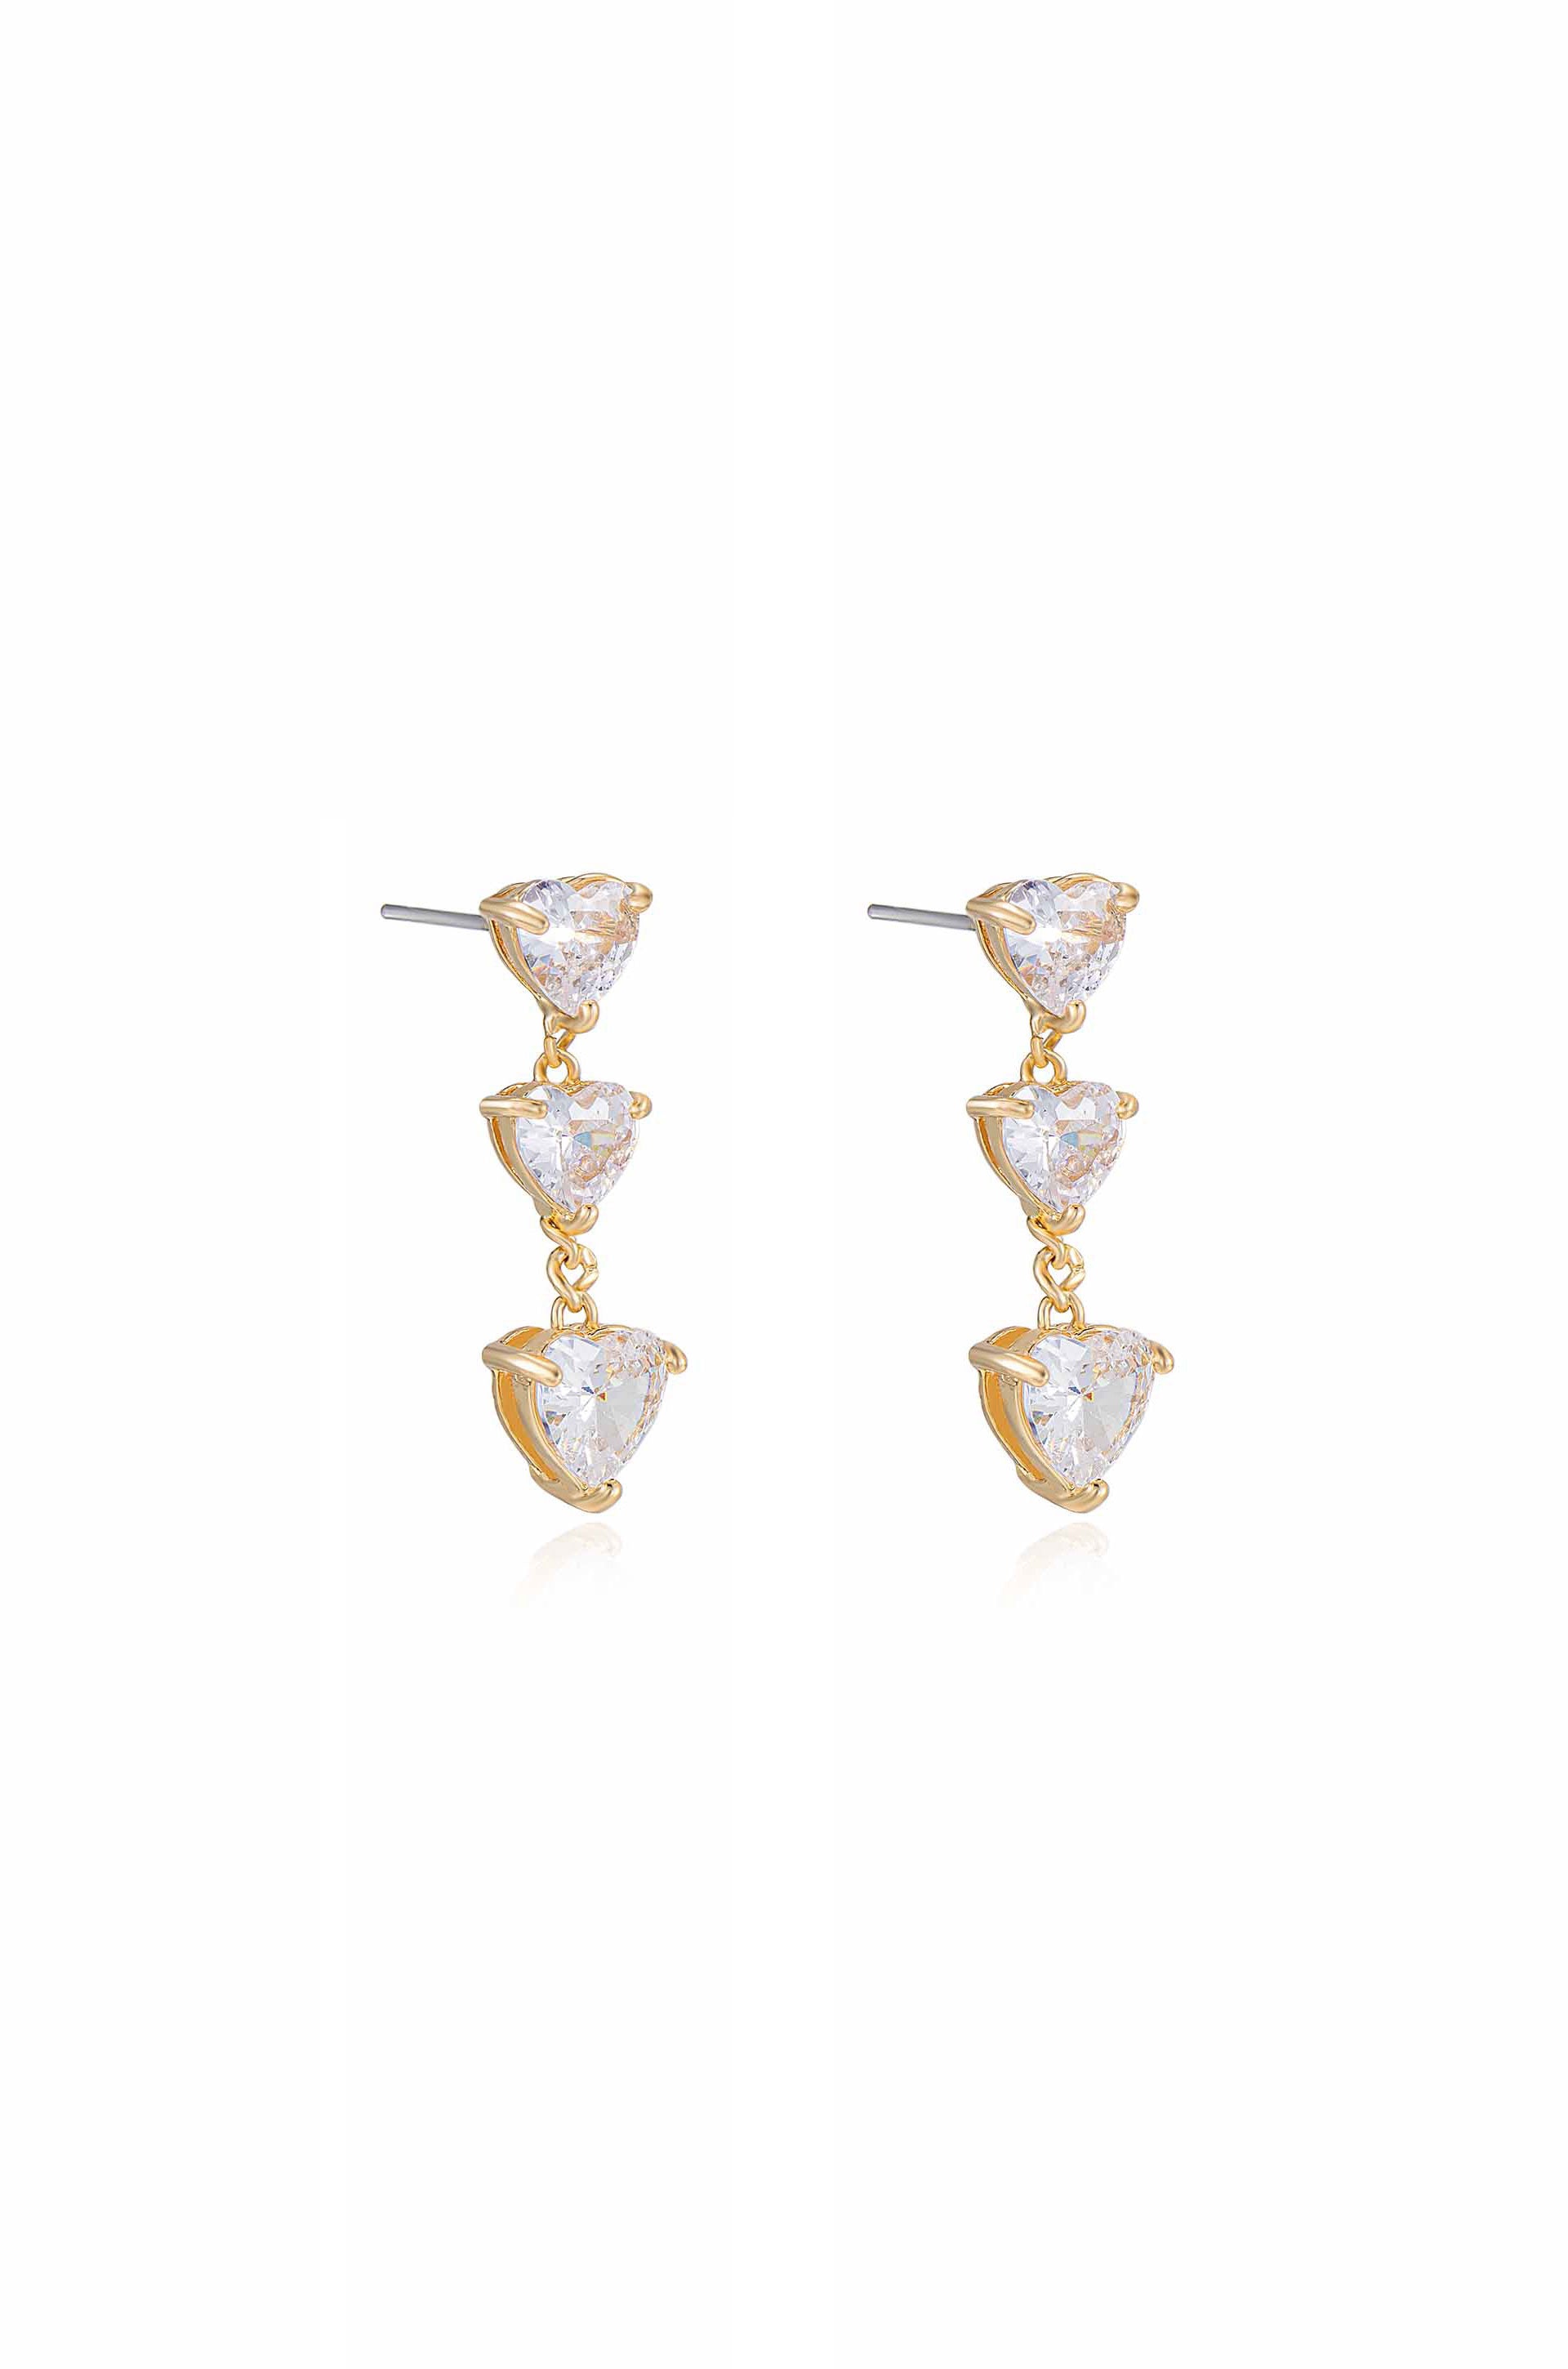 Queen of Hearts Crystal 18k Gold Plated Earrings side